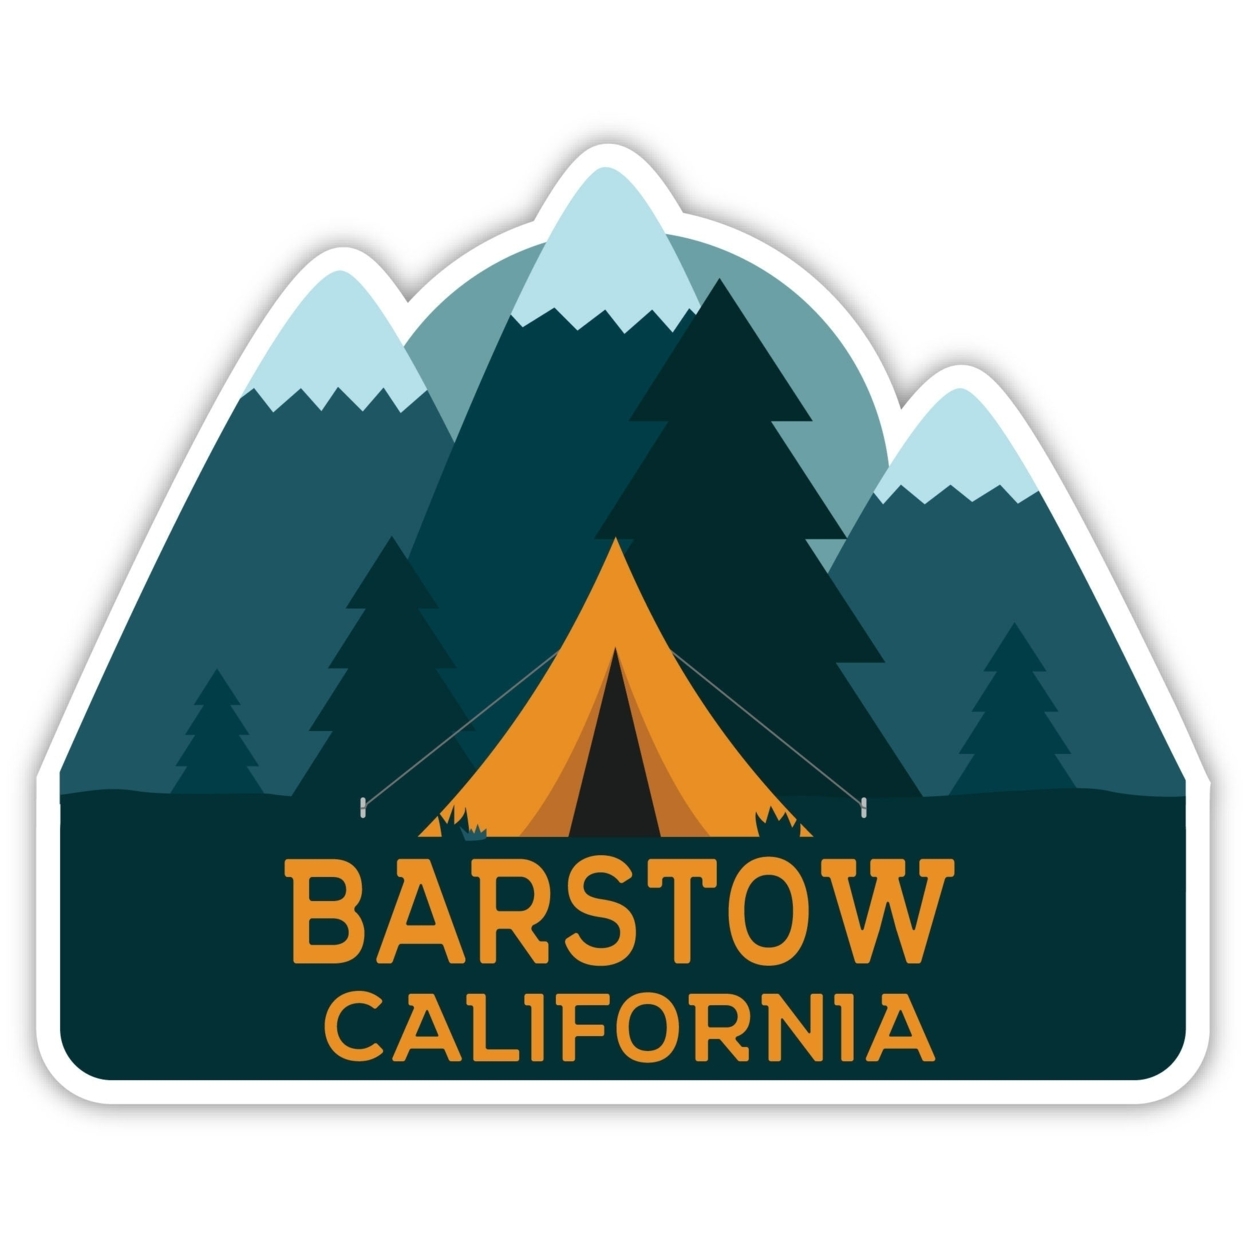 Barstow California Souvenir Decorative Stickers (Choose Theme And Size) - Single Unit, 10-Inch, Tent